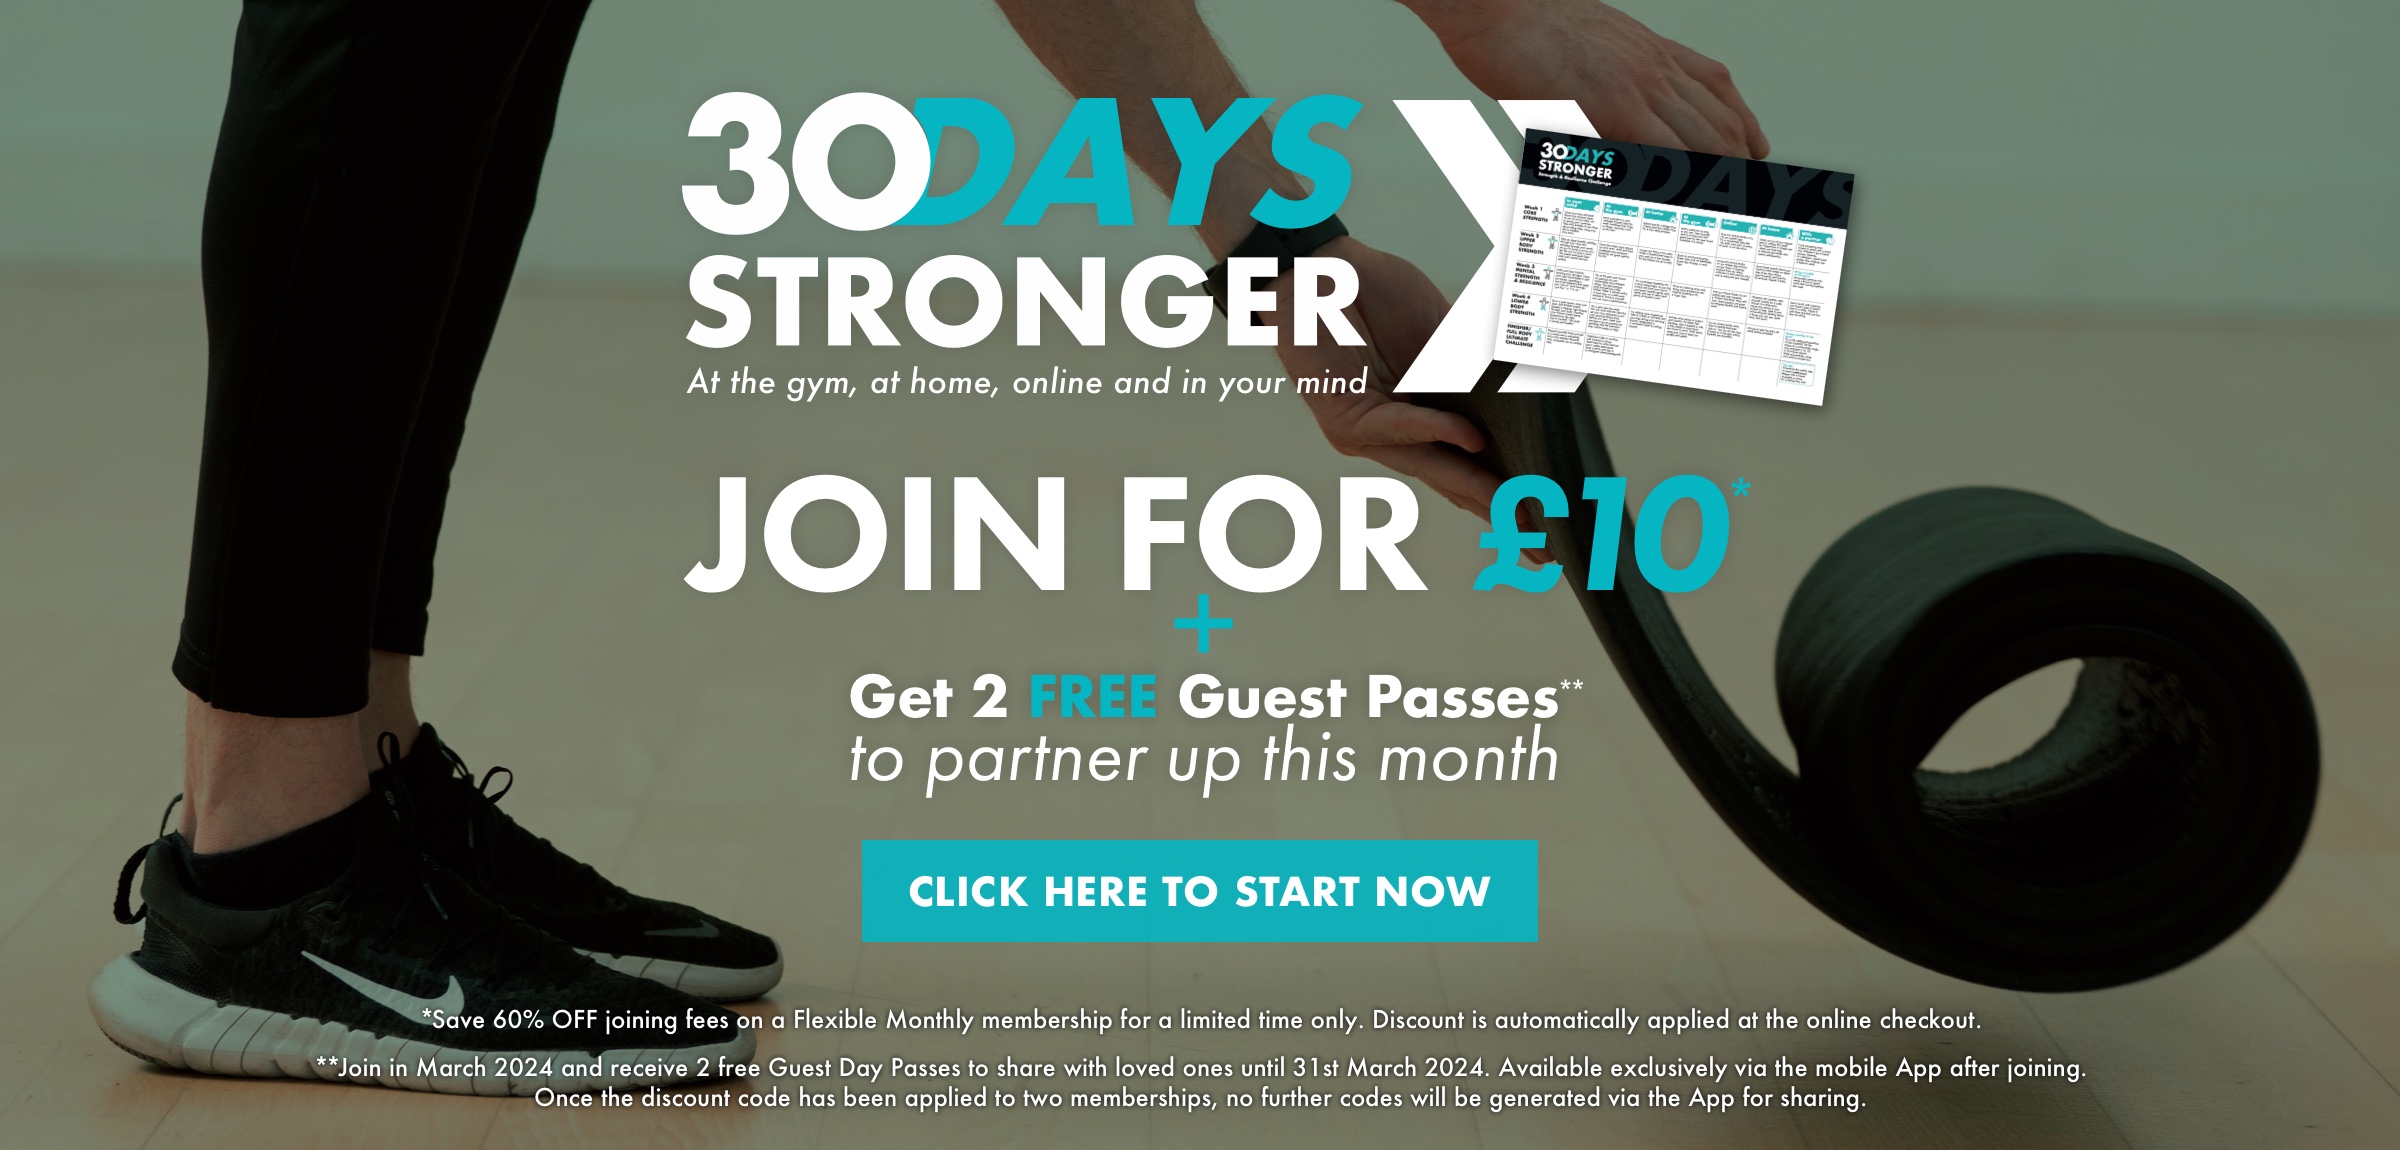 30 Days Stronger - Join Gym for £10 + 2 Free Guest Passes